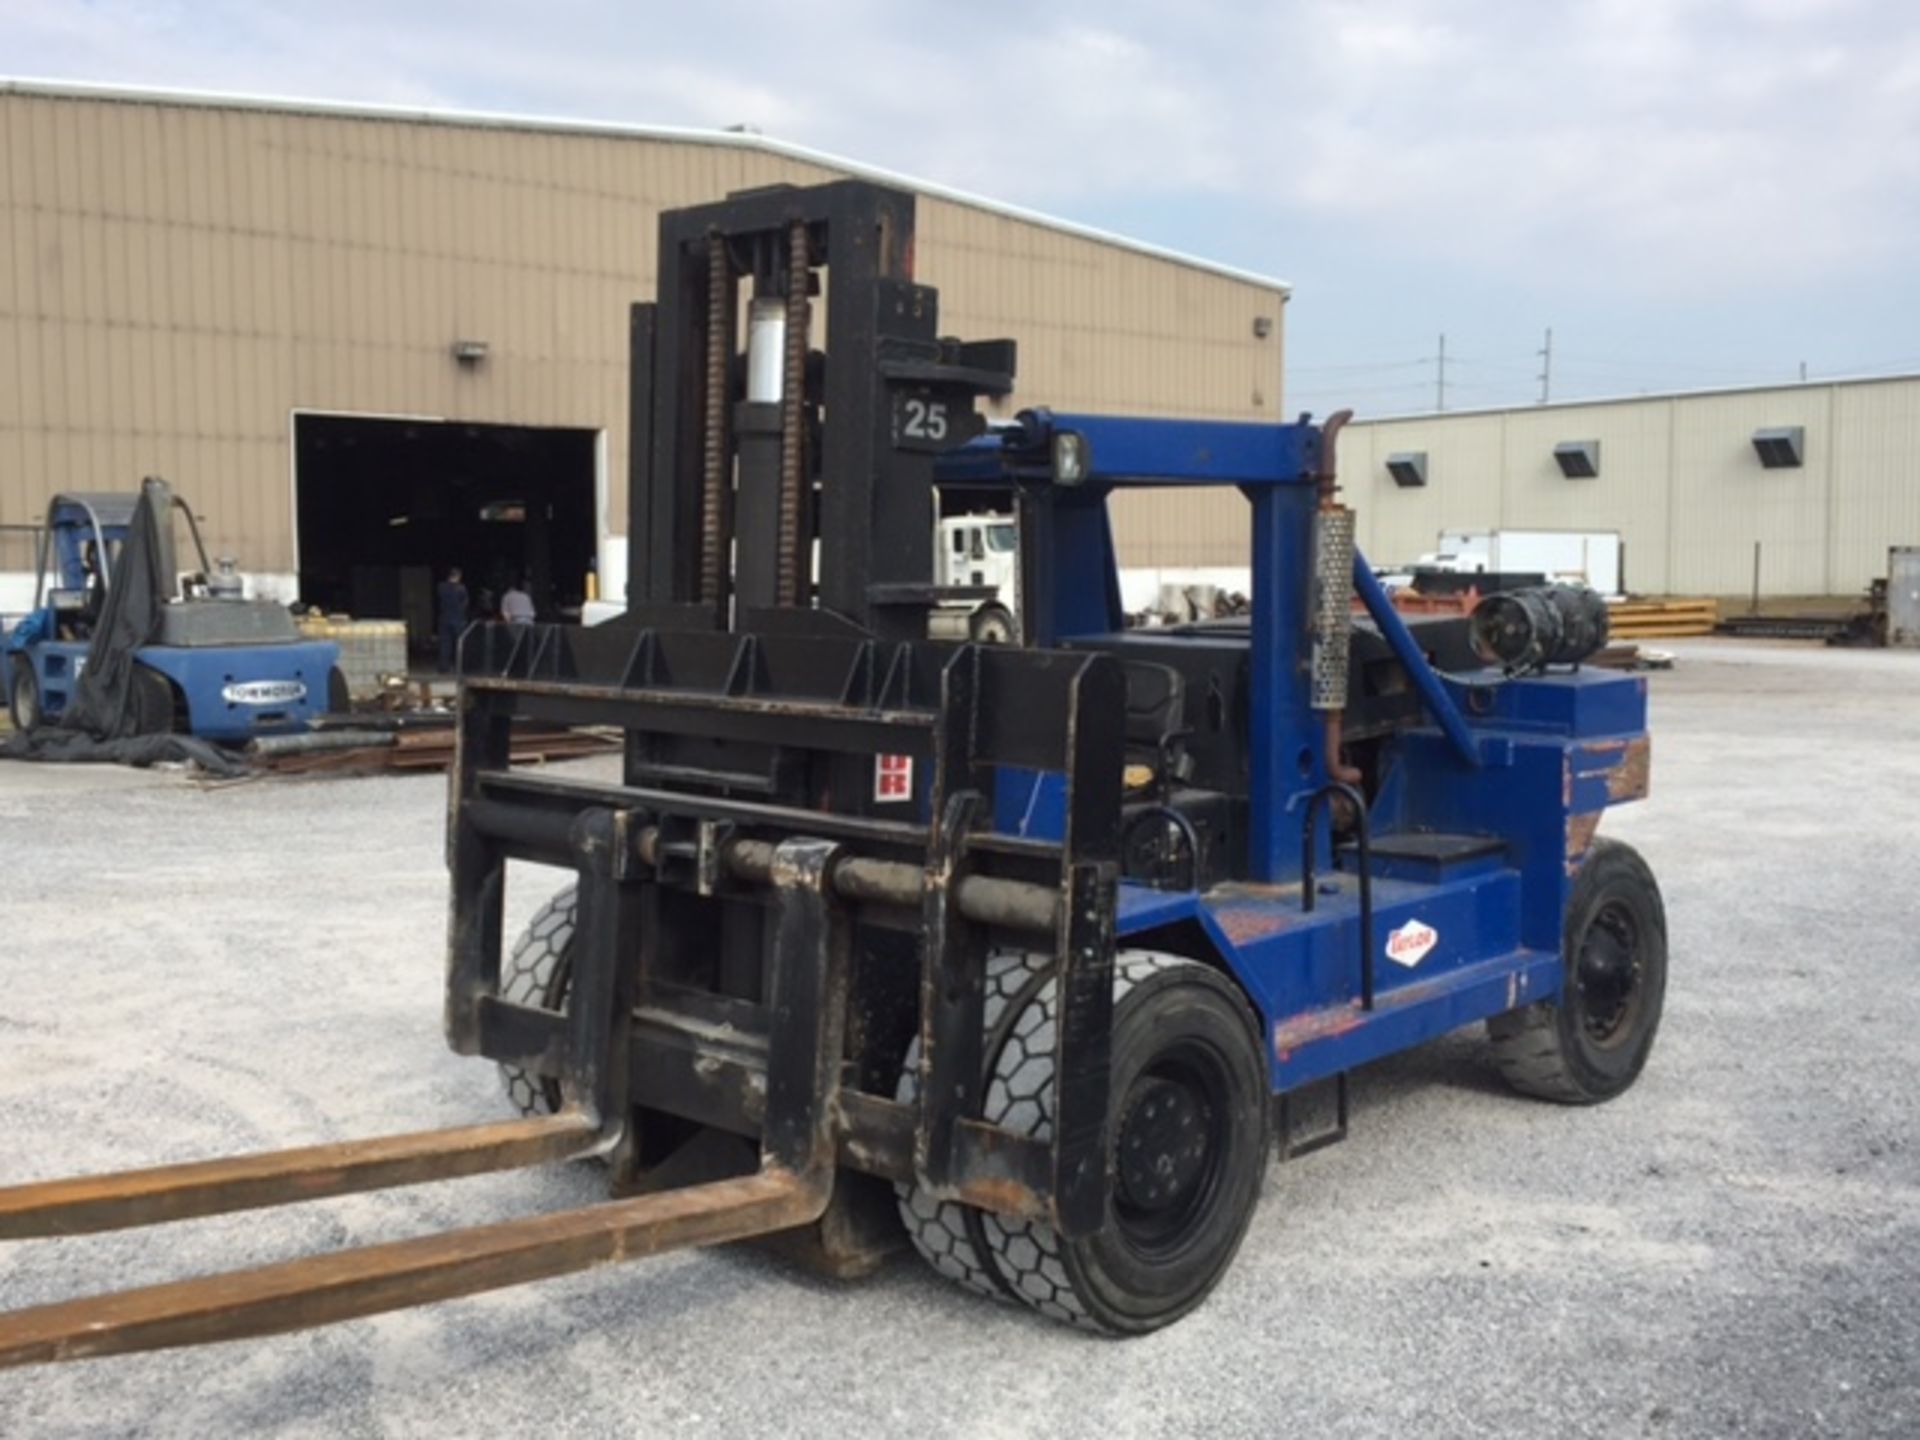 Taylor 40,000LB Forklift, LP Gas, 9' Lift, Cushion Tire, 351 Cleveland Ford Engine - Image 3 of 6